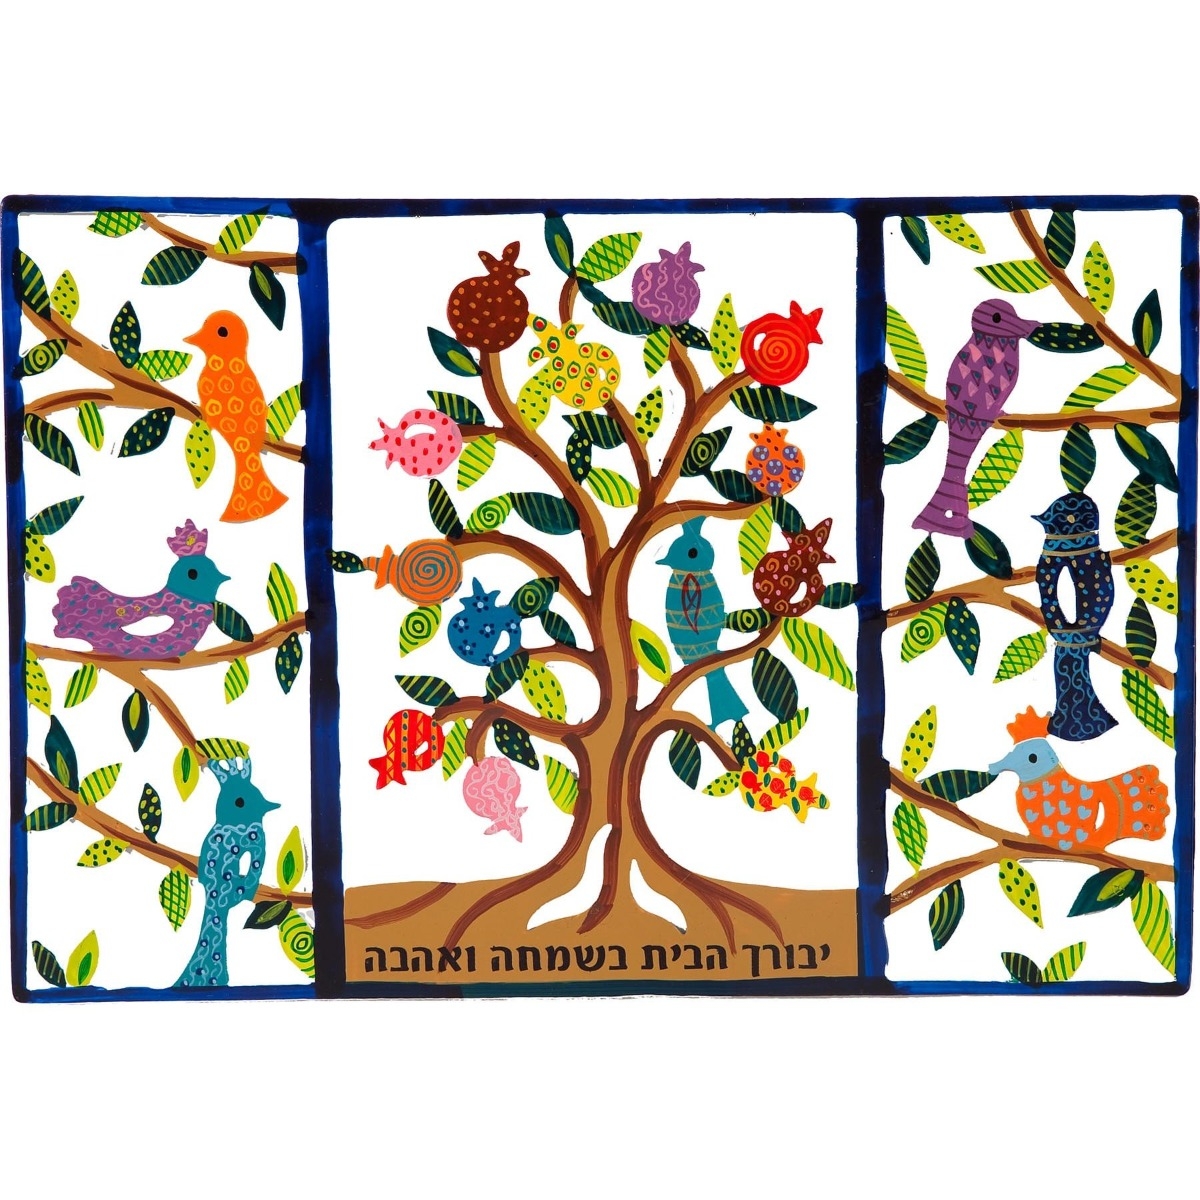 Yair Emanuel Laser-Cut and Hand-Painted Tryptich Wall Art Featuring Birds On Branches - 1